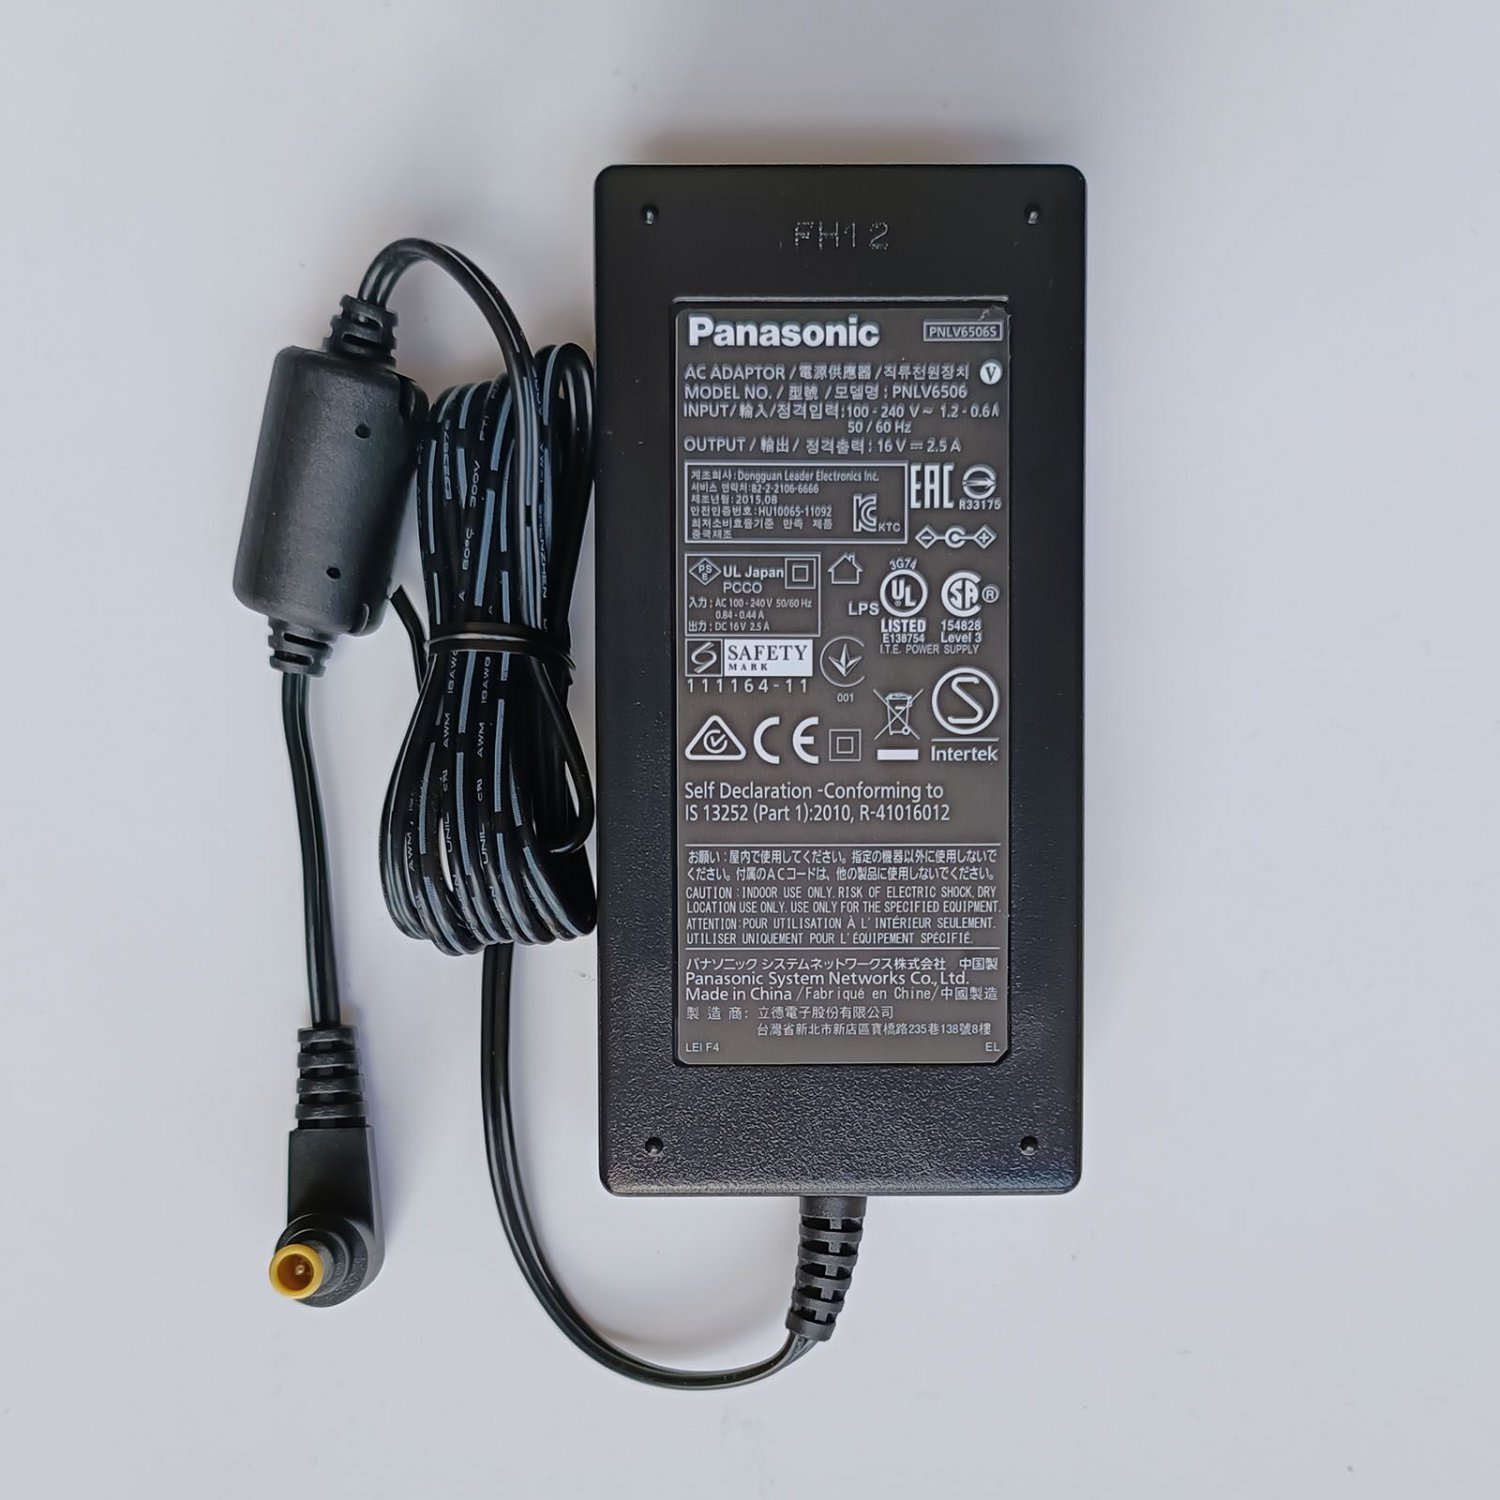 PNLV6506 16V 2.5A AC Adapter Power Supply For Panasonic Full HD Video Conference Multipoint KX-VC600